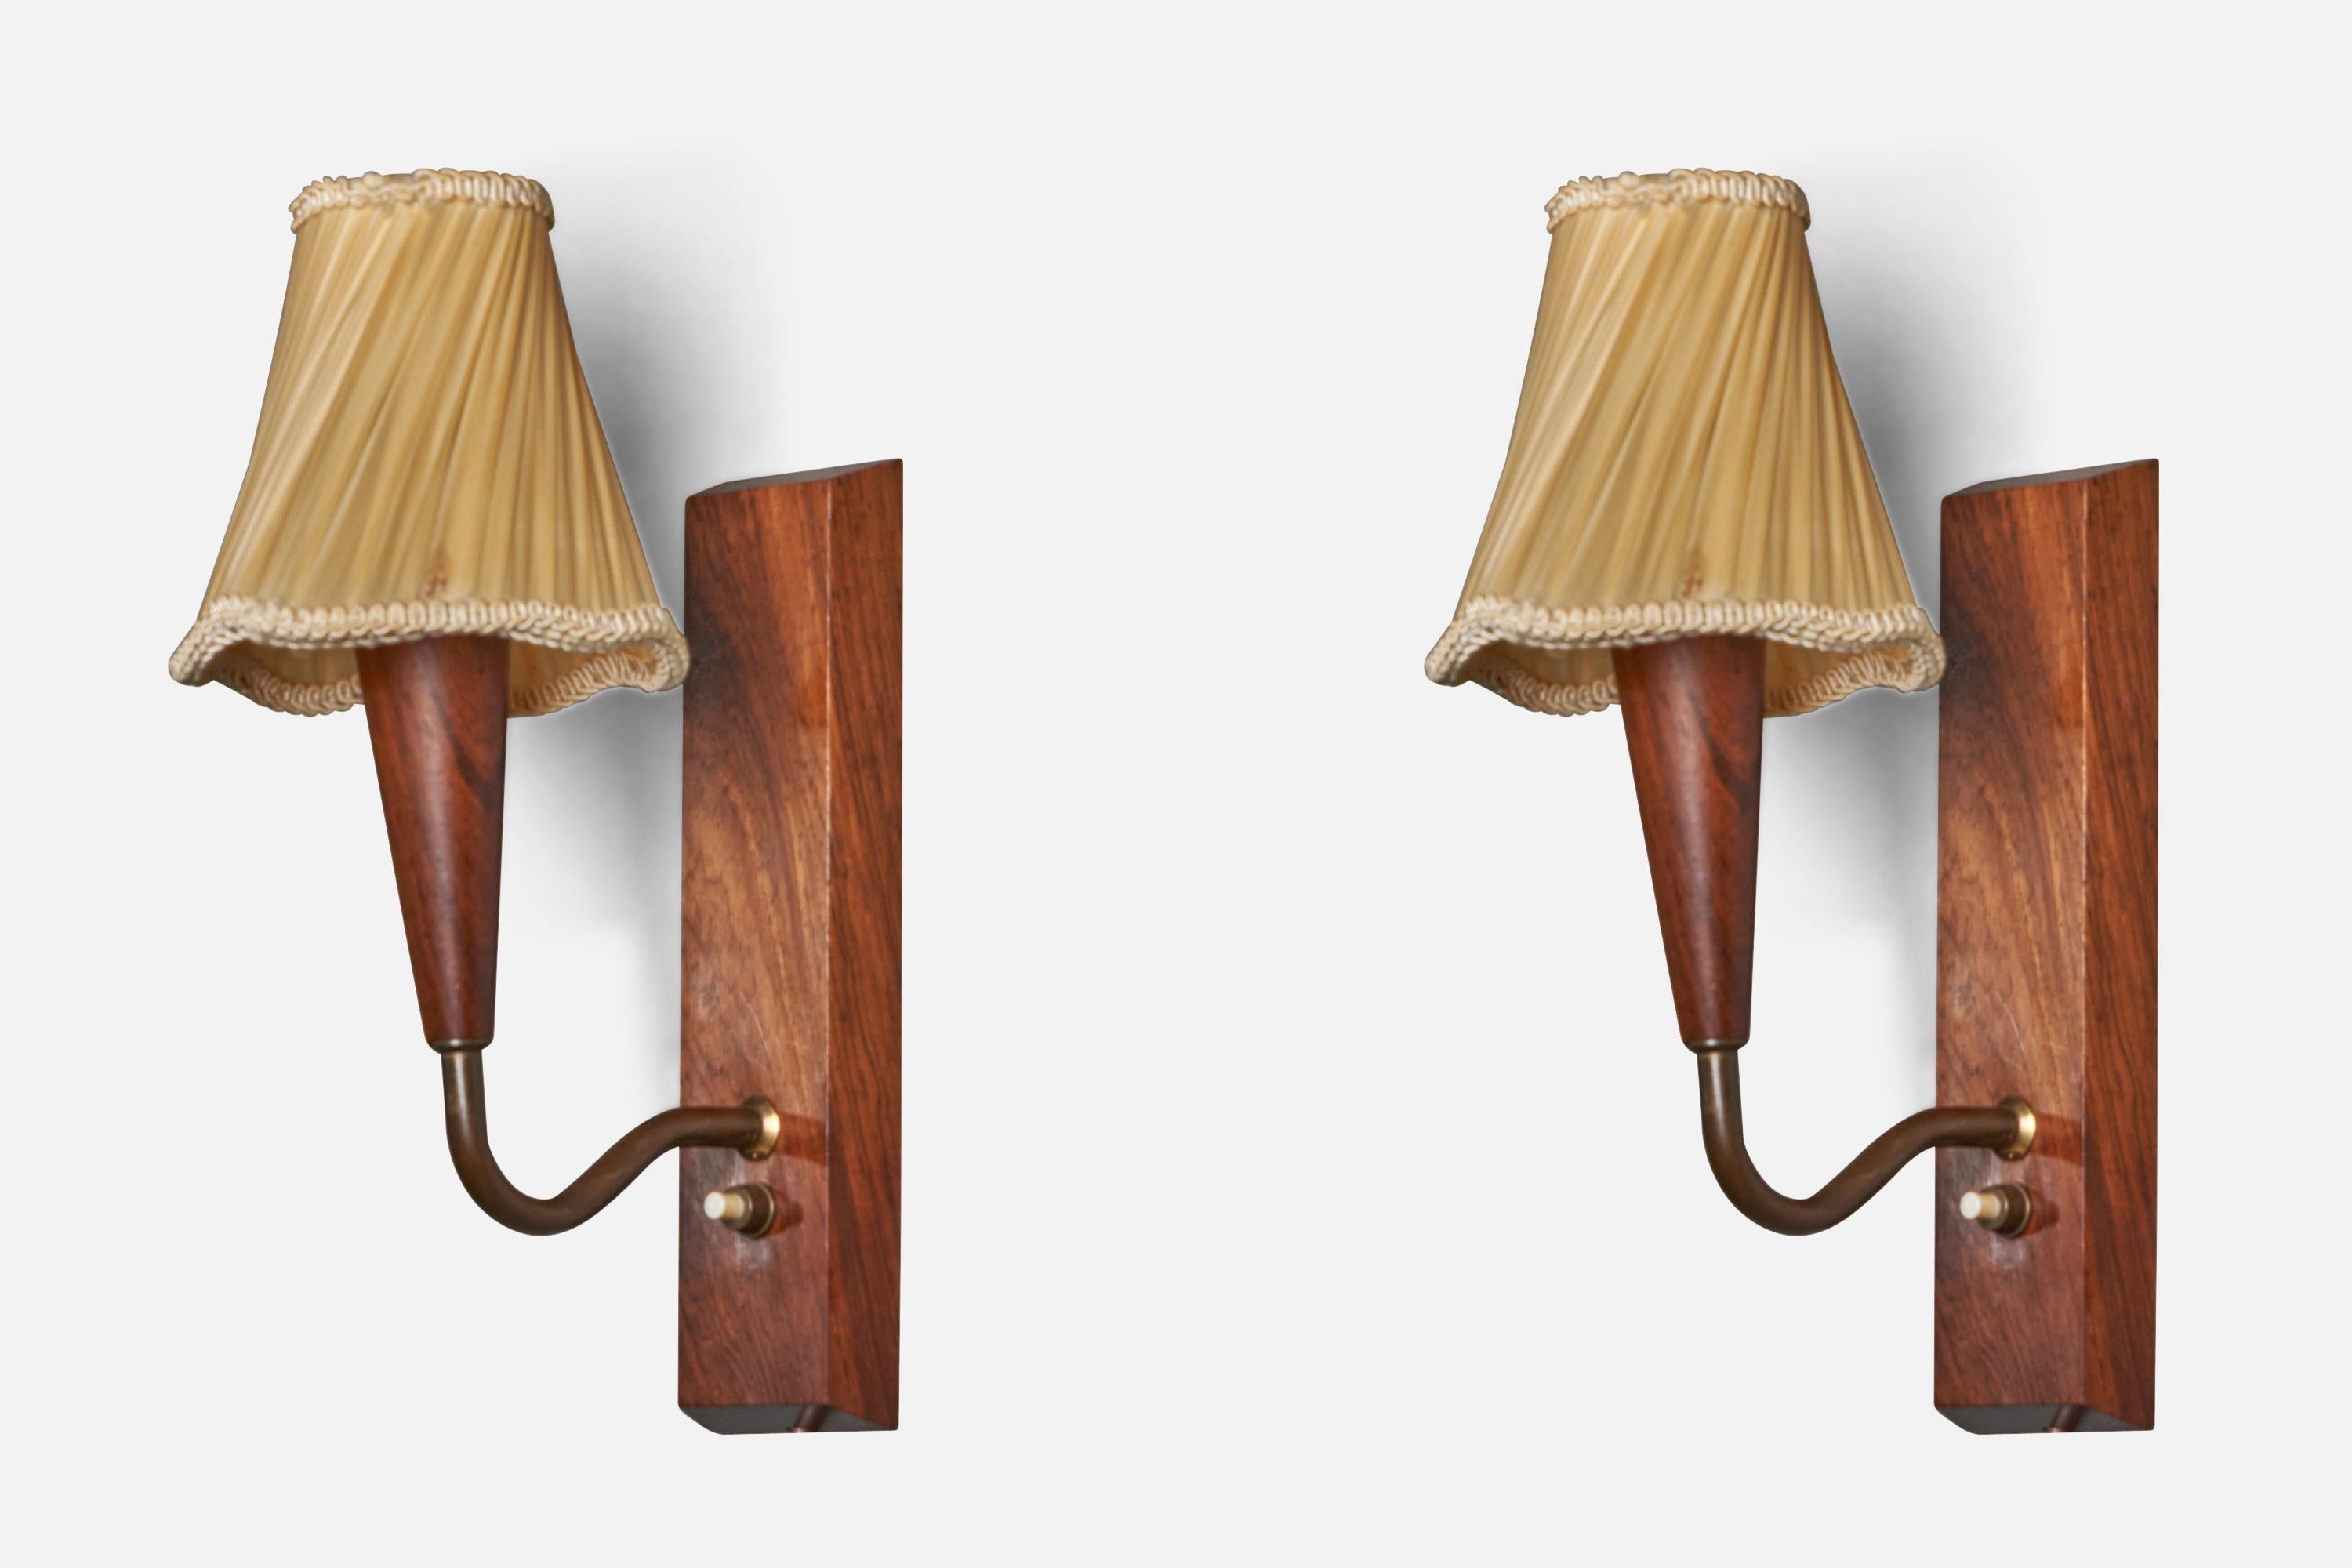 A pair of teak, brass and yellow fabric wall lights designed and produced in Denmark, c. 1940s.

Overall Dimensions (inches): 11” H x 4.5” W x 6.75” D
Bulb Specifications: E-14 Bulb
Number of Sockets: 1
